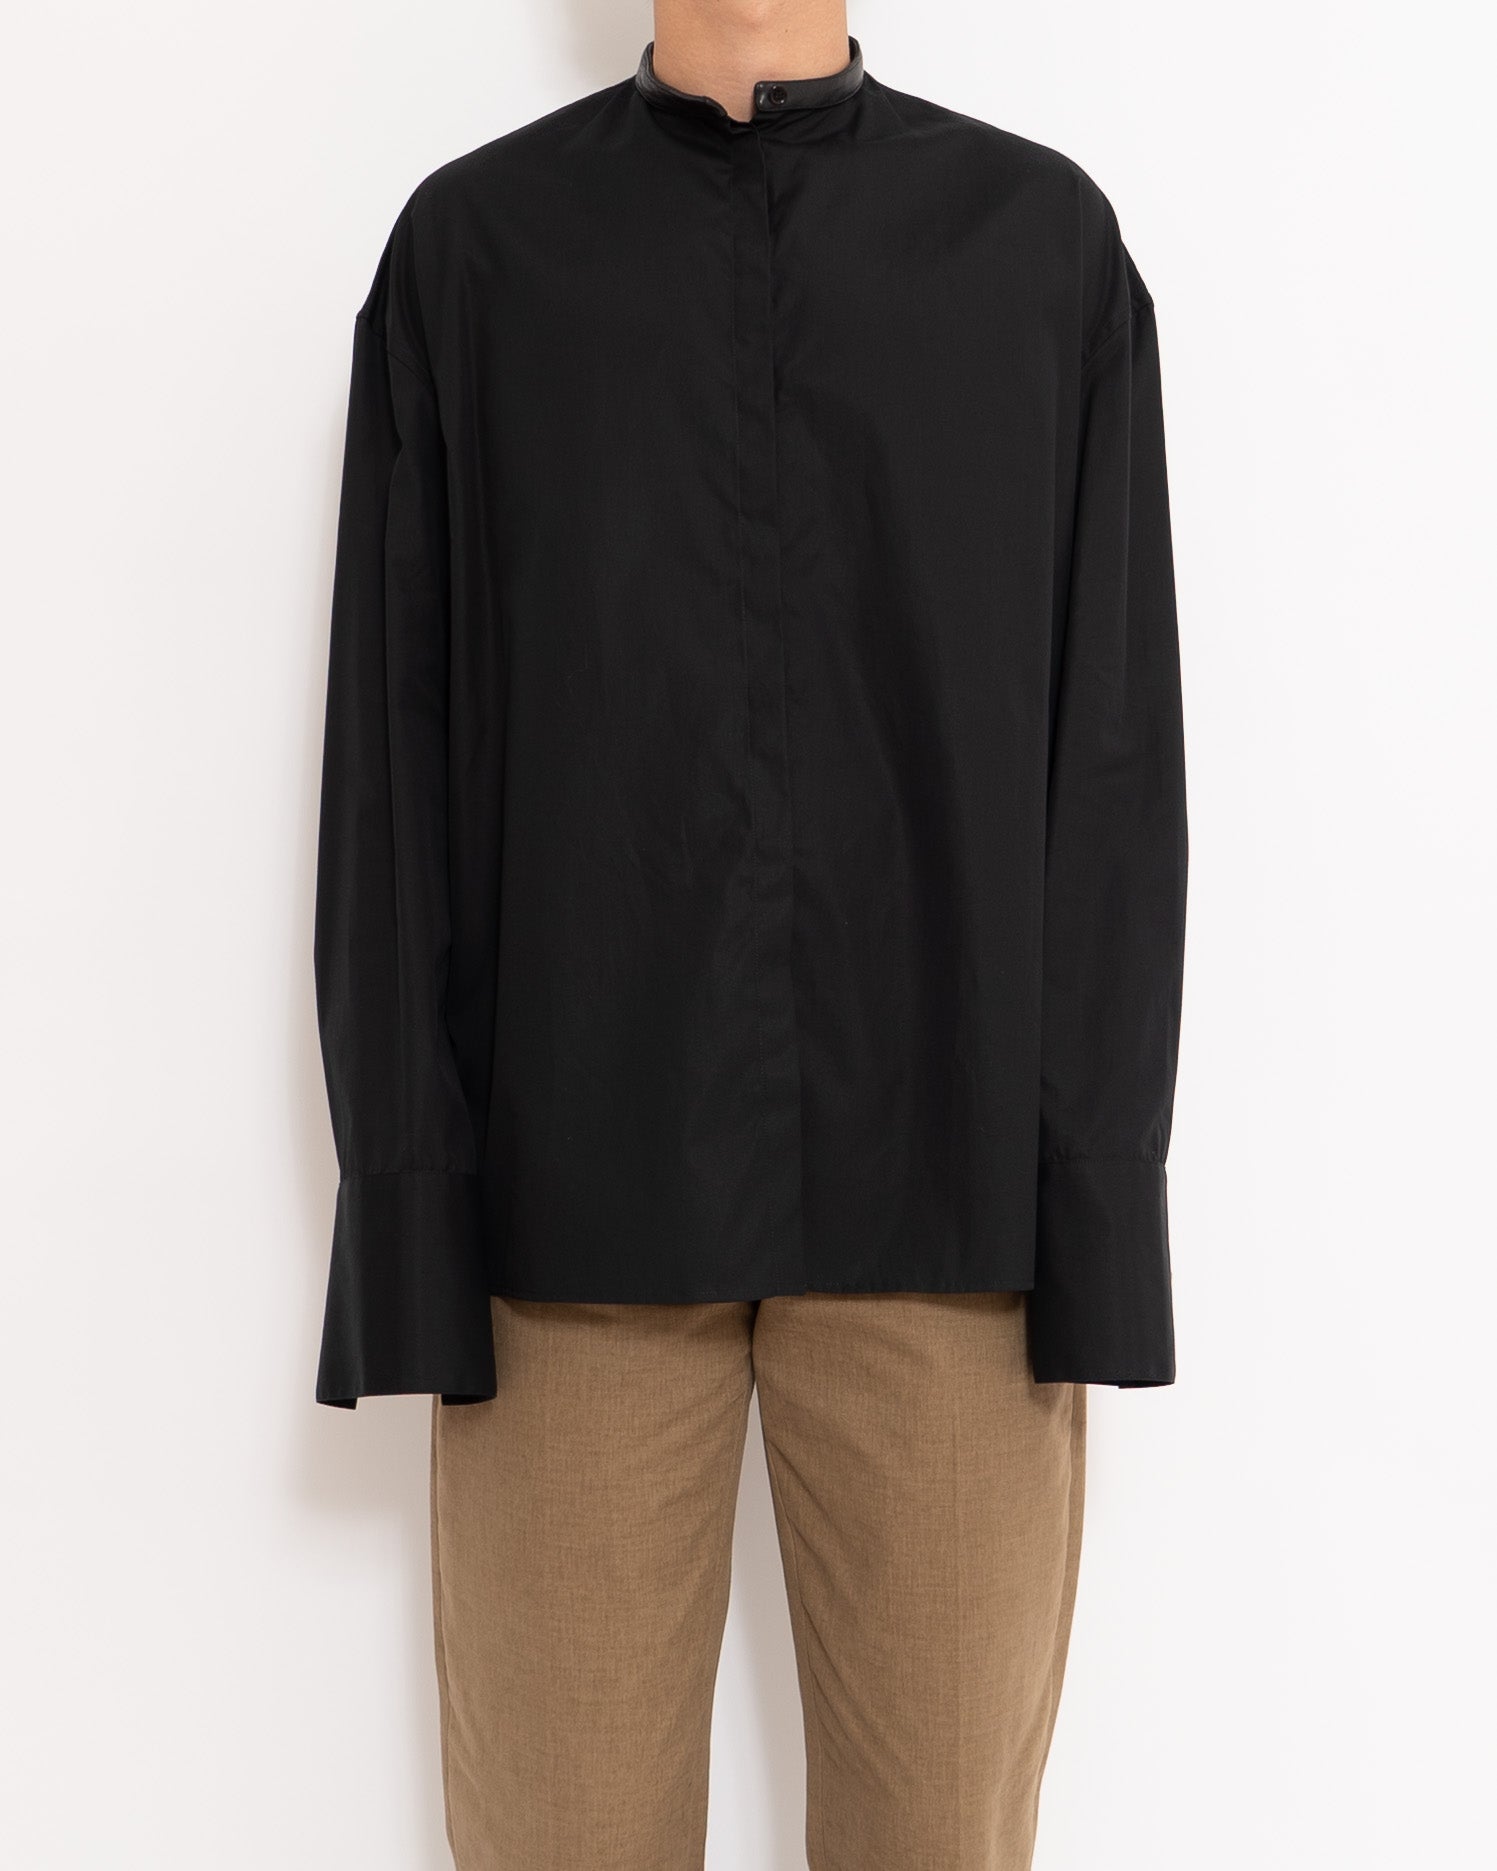 FW20 Classic Shirt with Mao Leather Collar